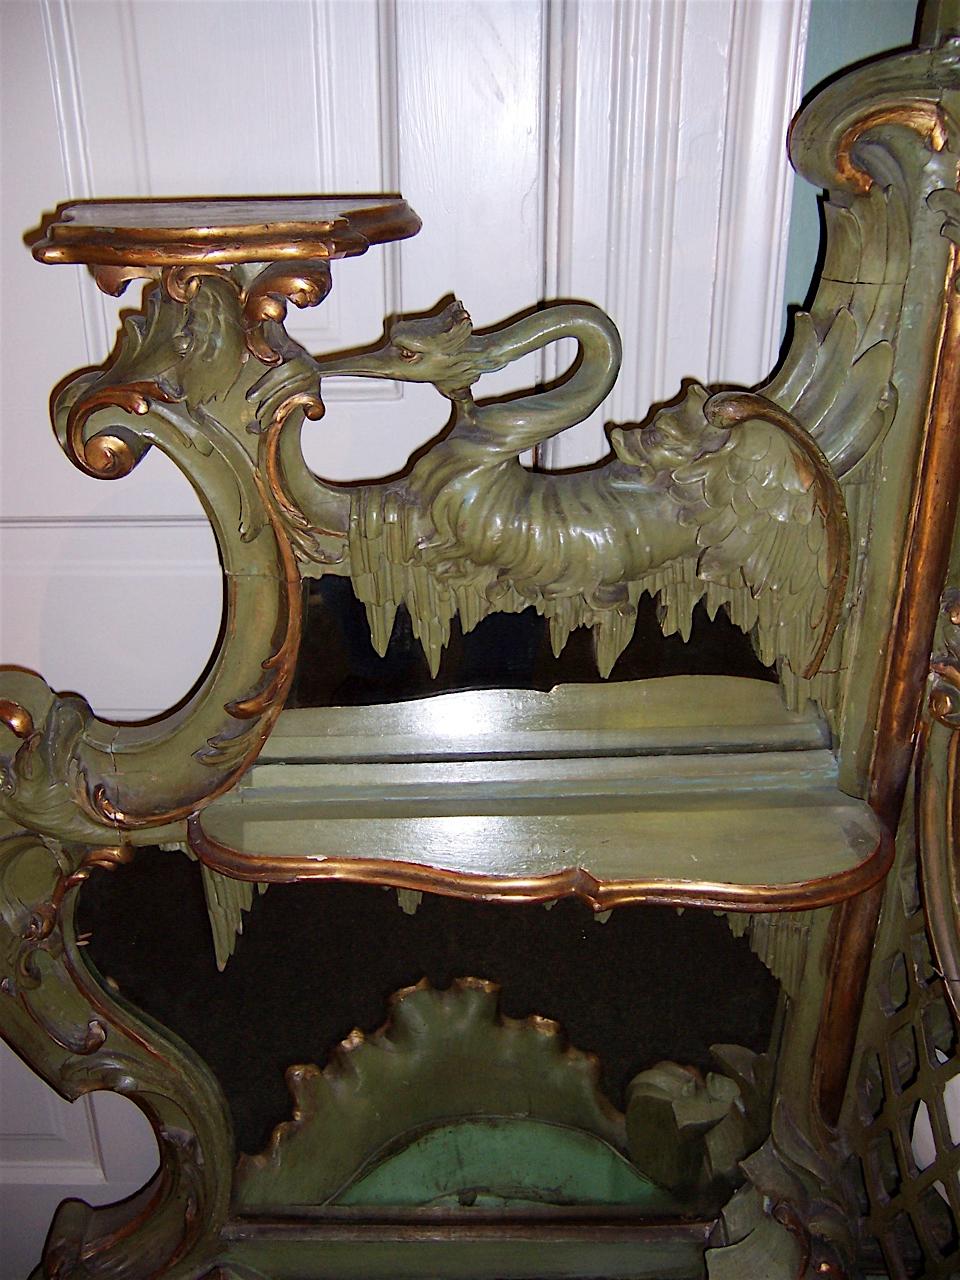 Large Gilt Rococo-style Venetian Hall Mirror Jardiniere In Good Condition For Sale In Salt Lake City, UT